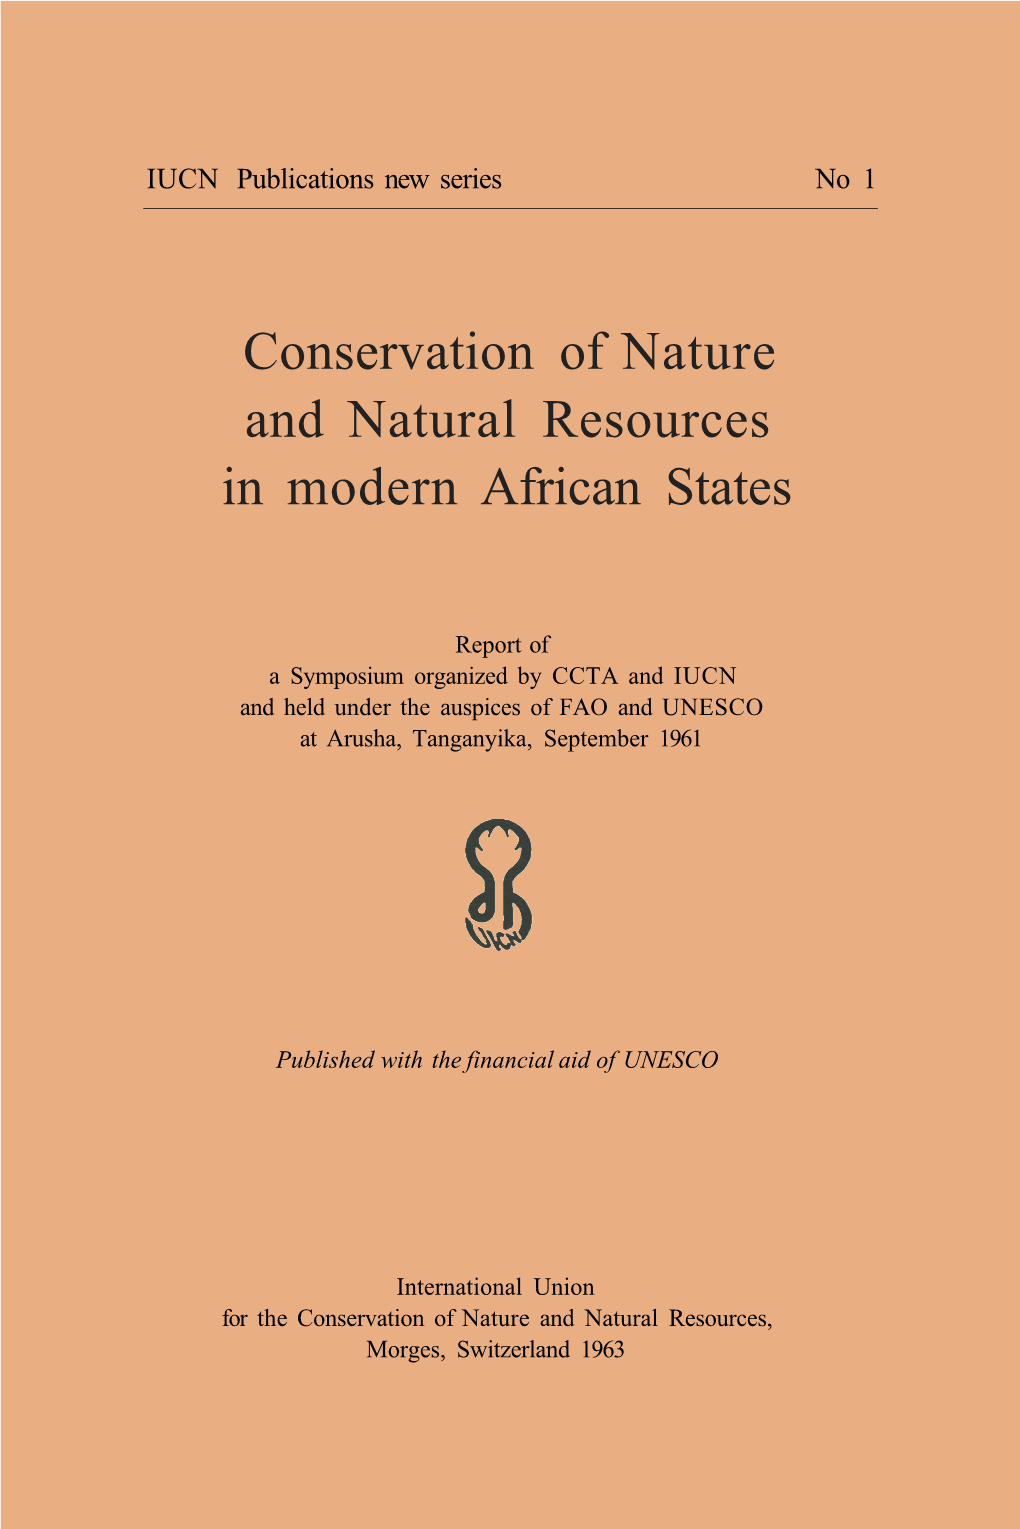 Conservation of Nature and Natural Resources in Modern African States